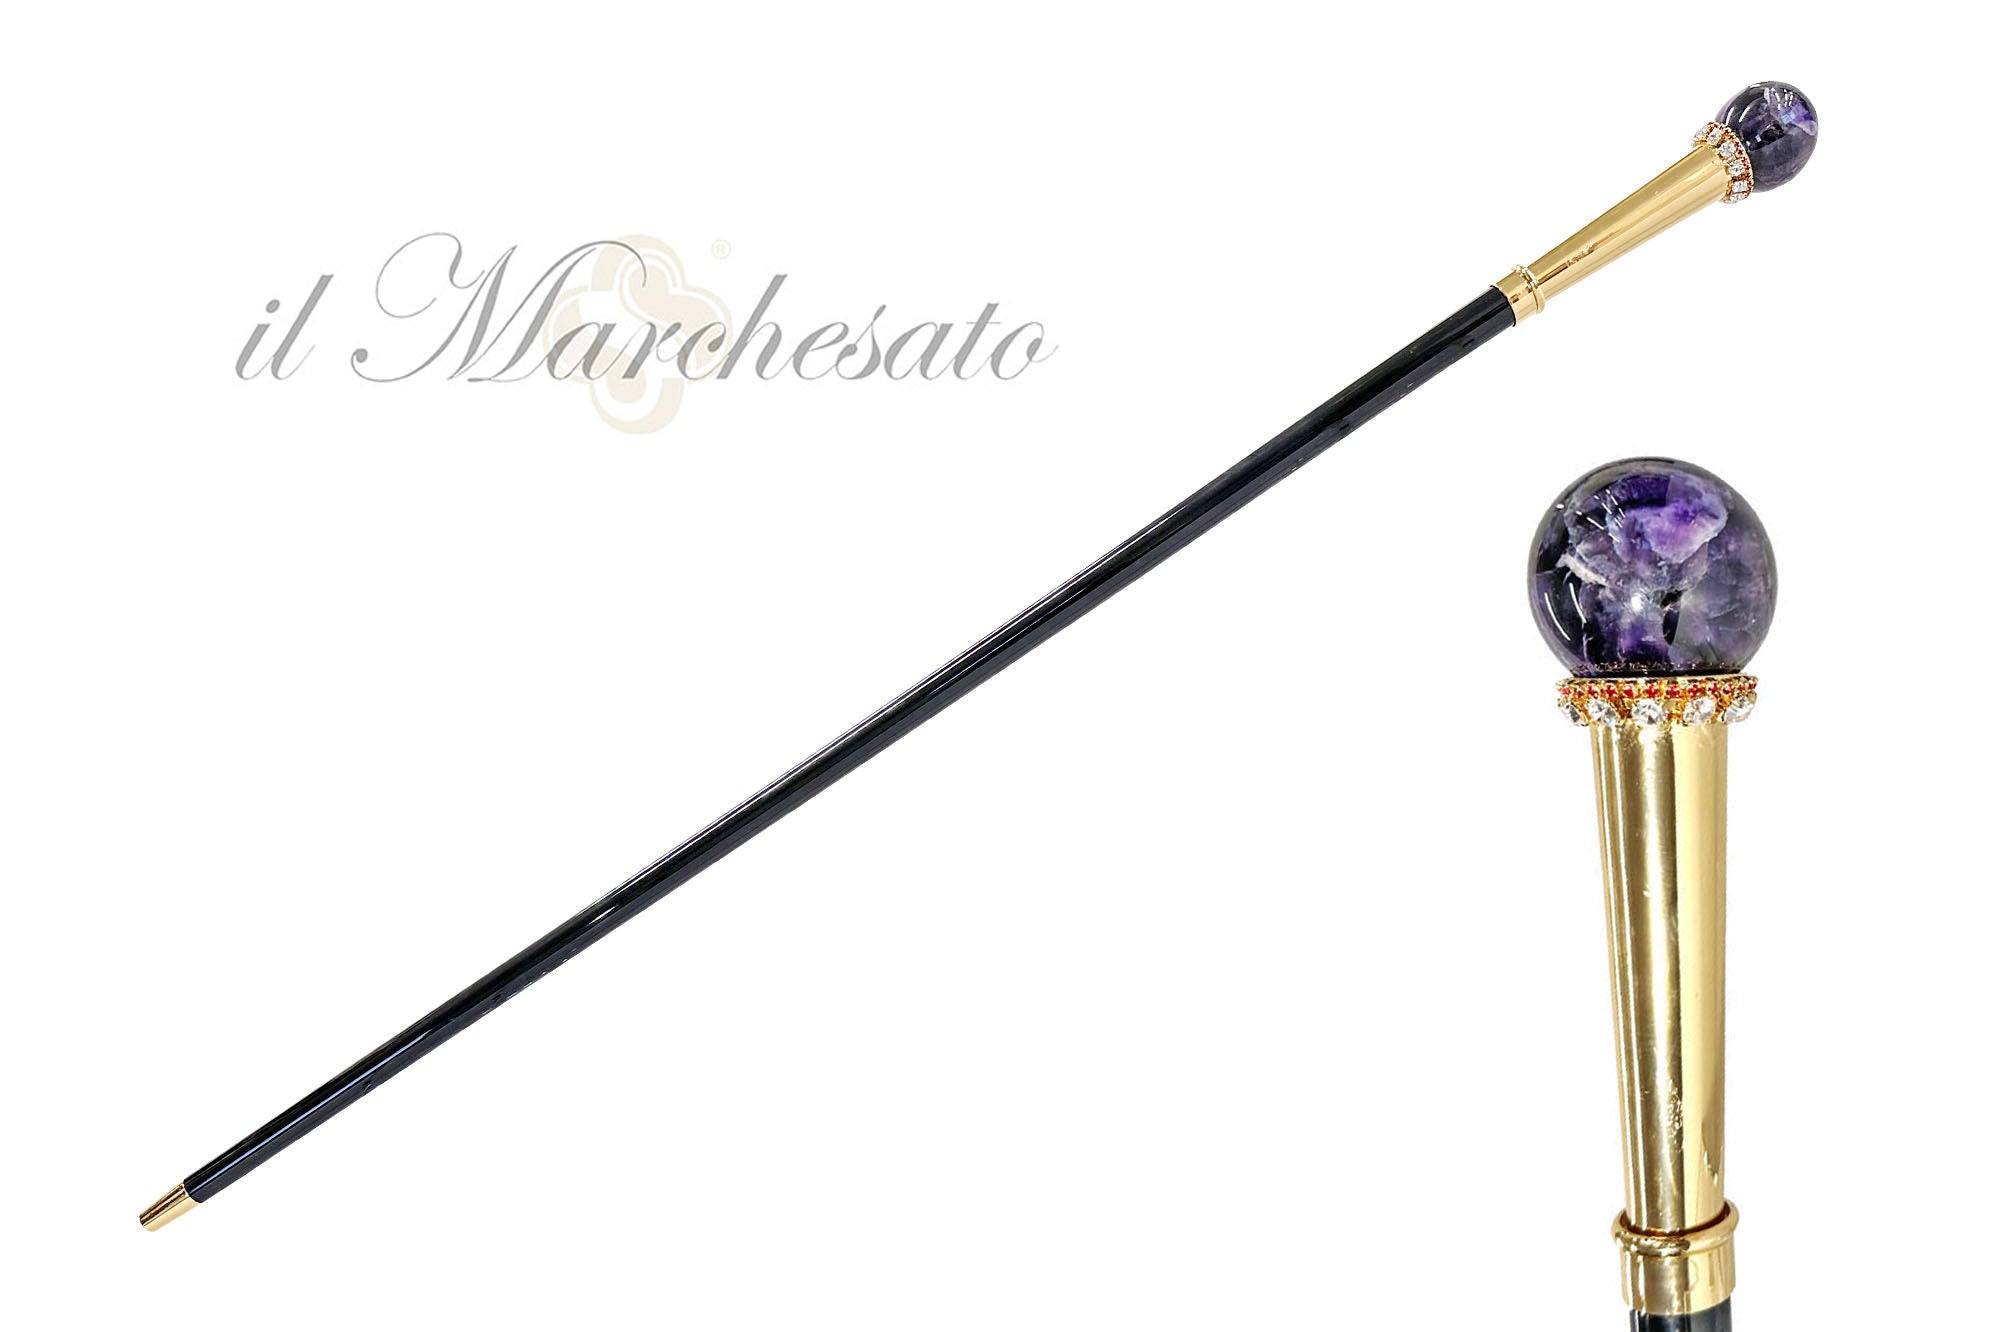 Walking stick - Exquisite Sphere With Minerals Crystals - Natural Amethyst Ball